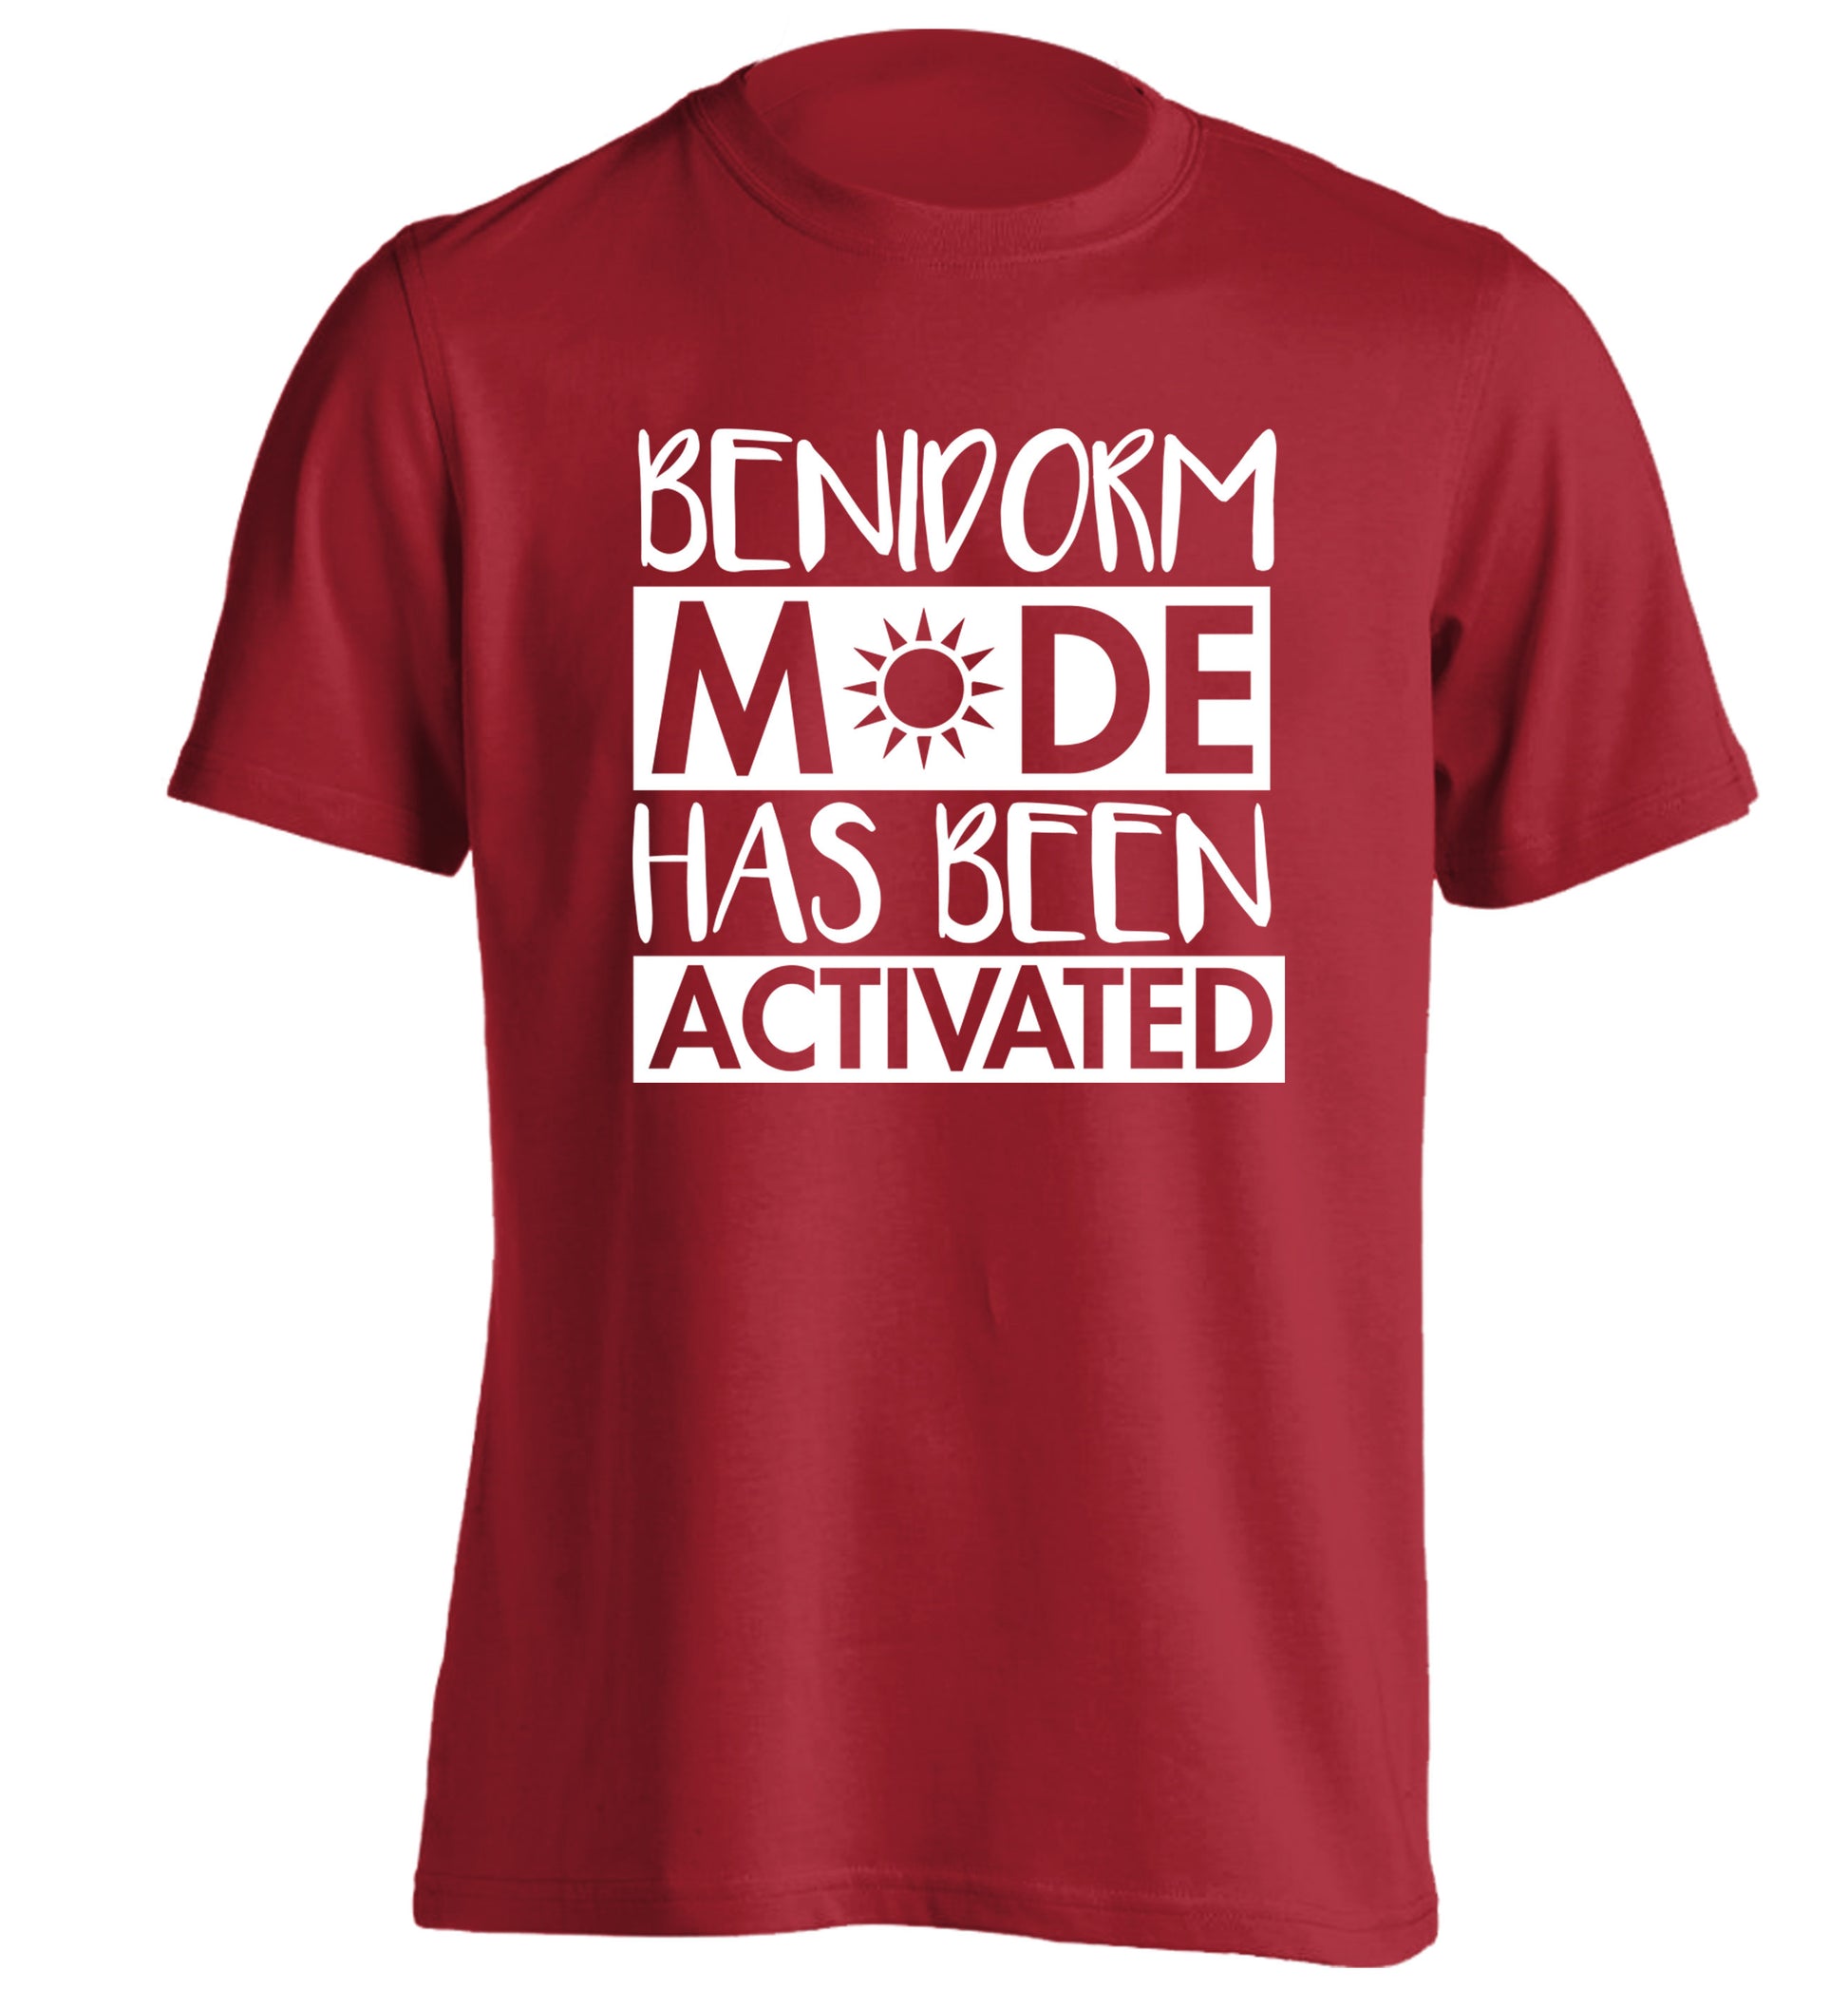 Benidorm mode has been activated adults unisex red Tshirt 2XL